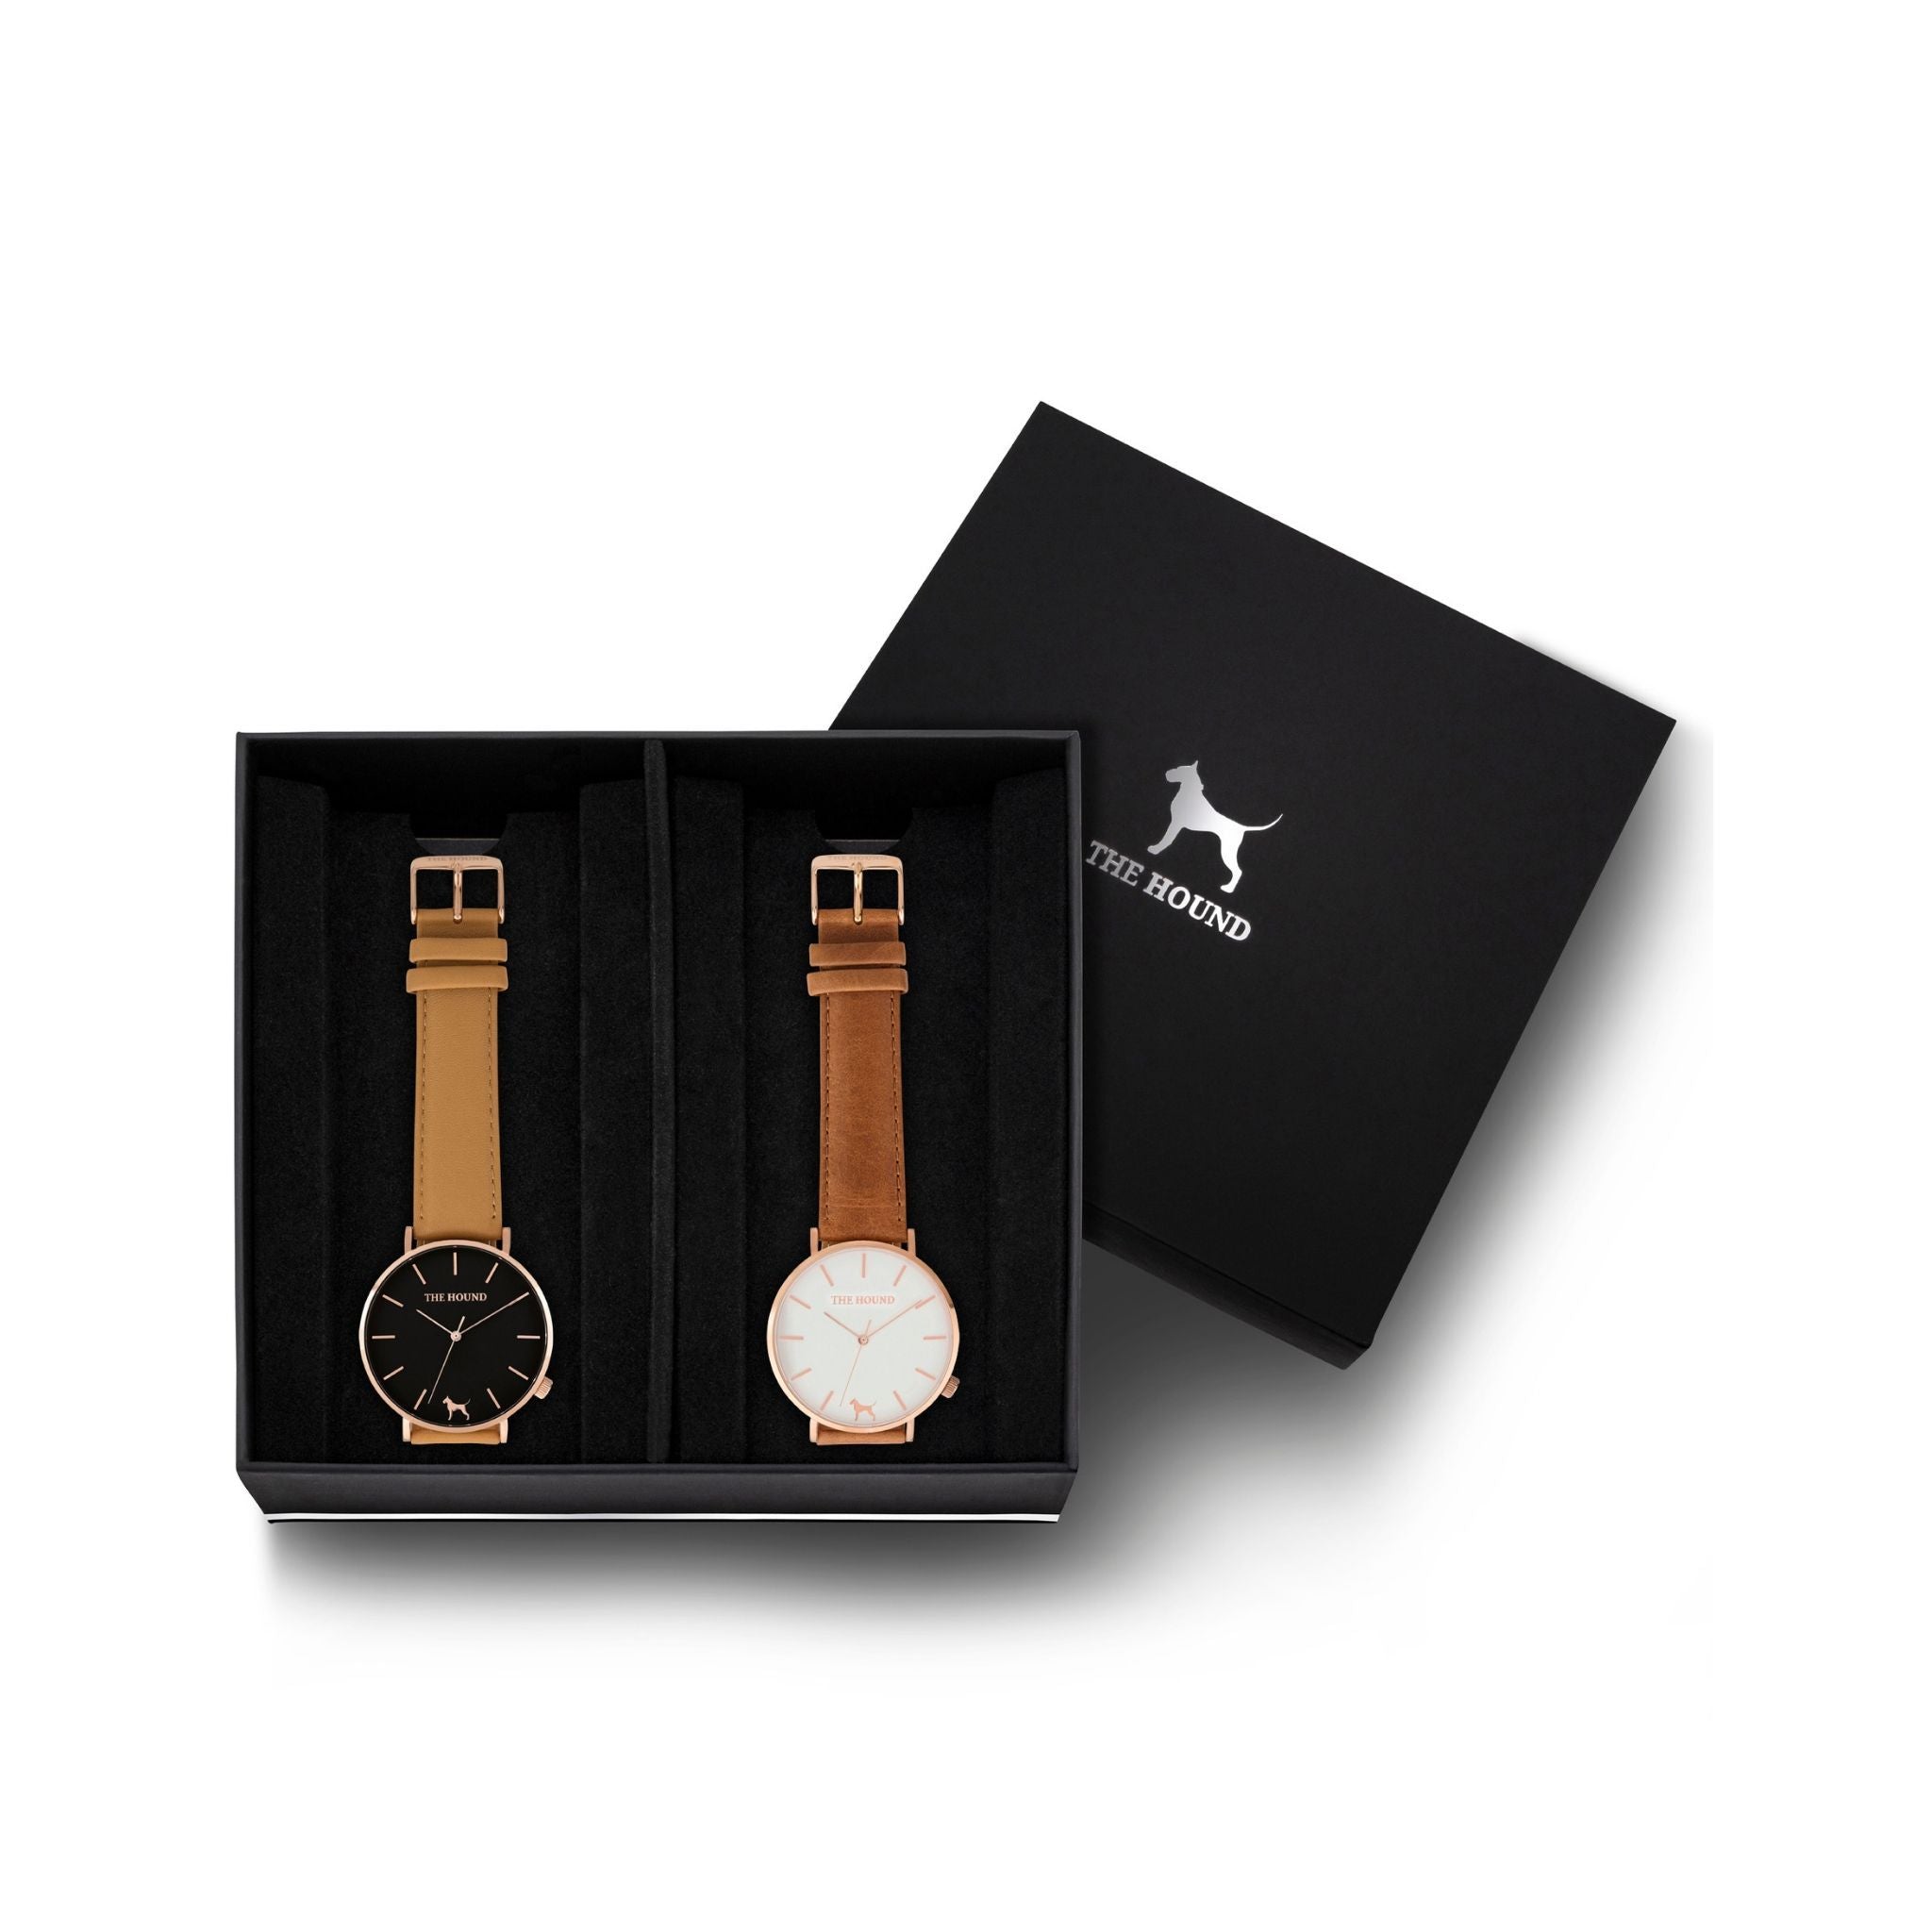 Custom gift set - Rose gold and black watch with stitched camel genuine leather band and a rose gold and white watch with stitched tan genuine leather band